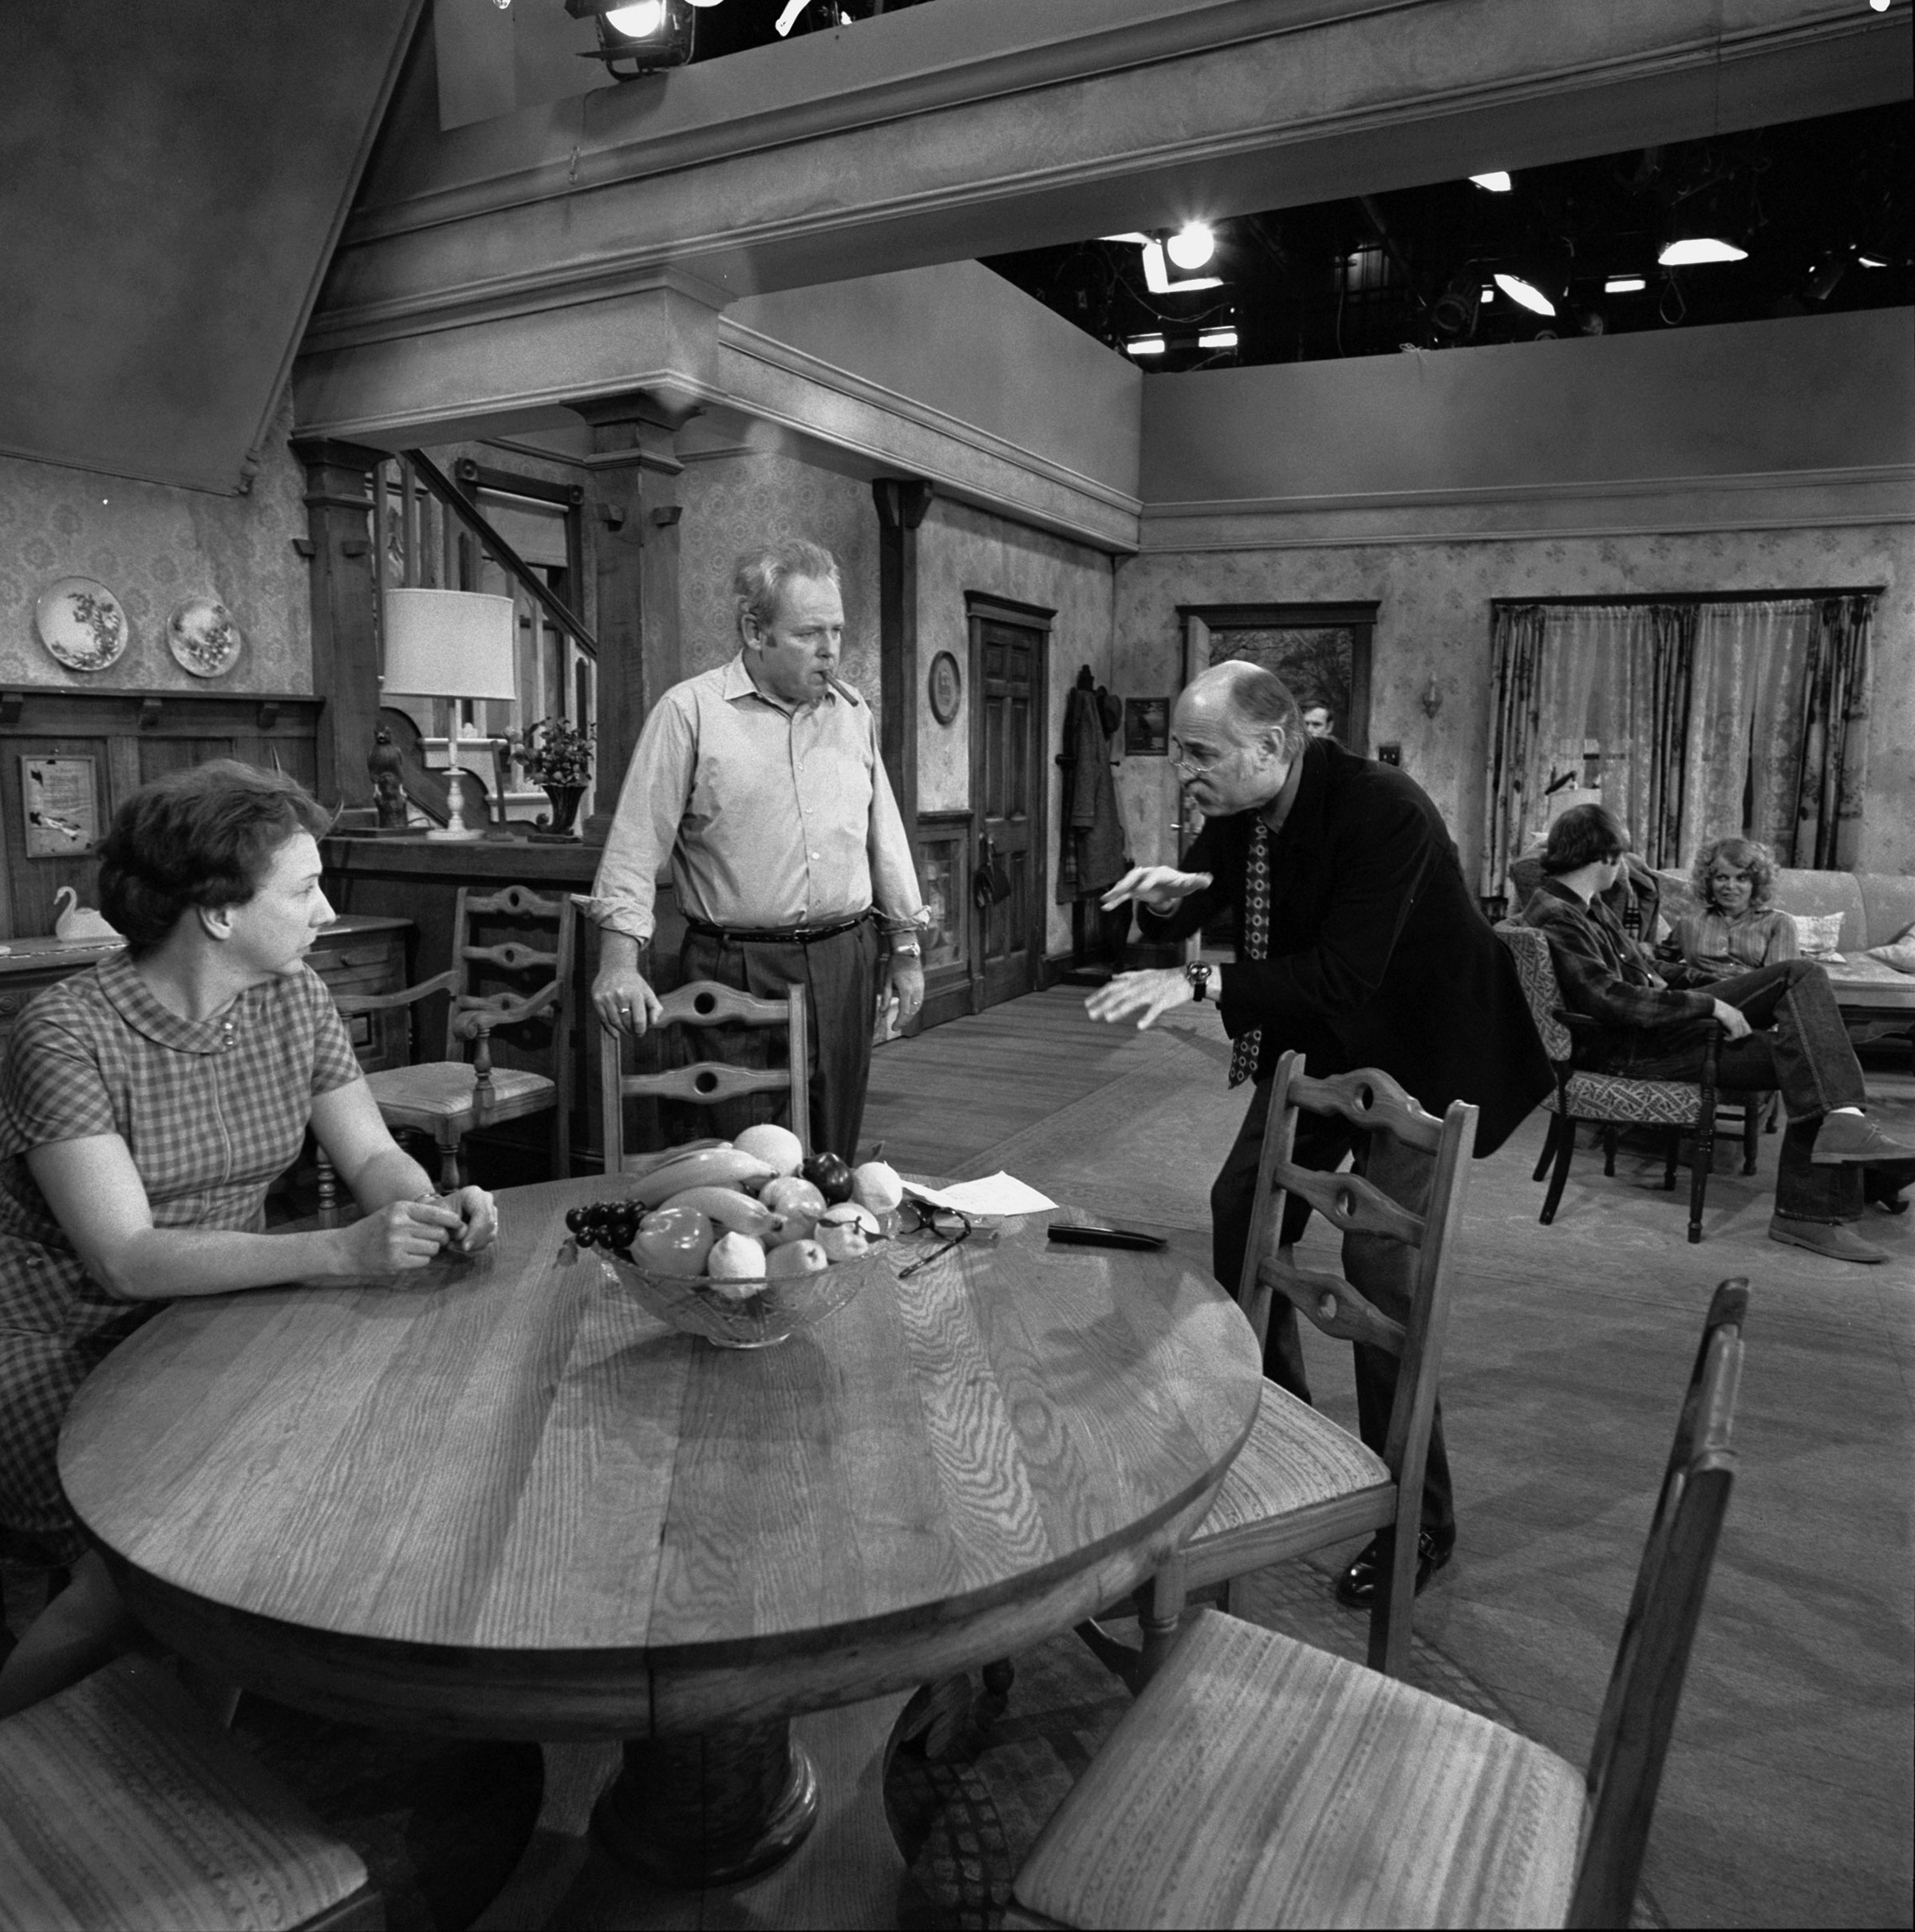 Jean Stapleton and Carroll O'Connor speaking to All in the Family show creator Norman Lear, Dec. 22, 1970.